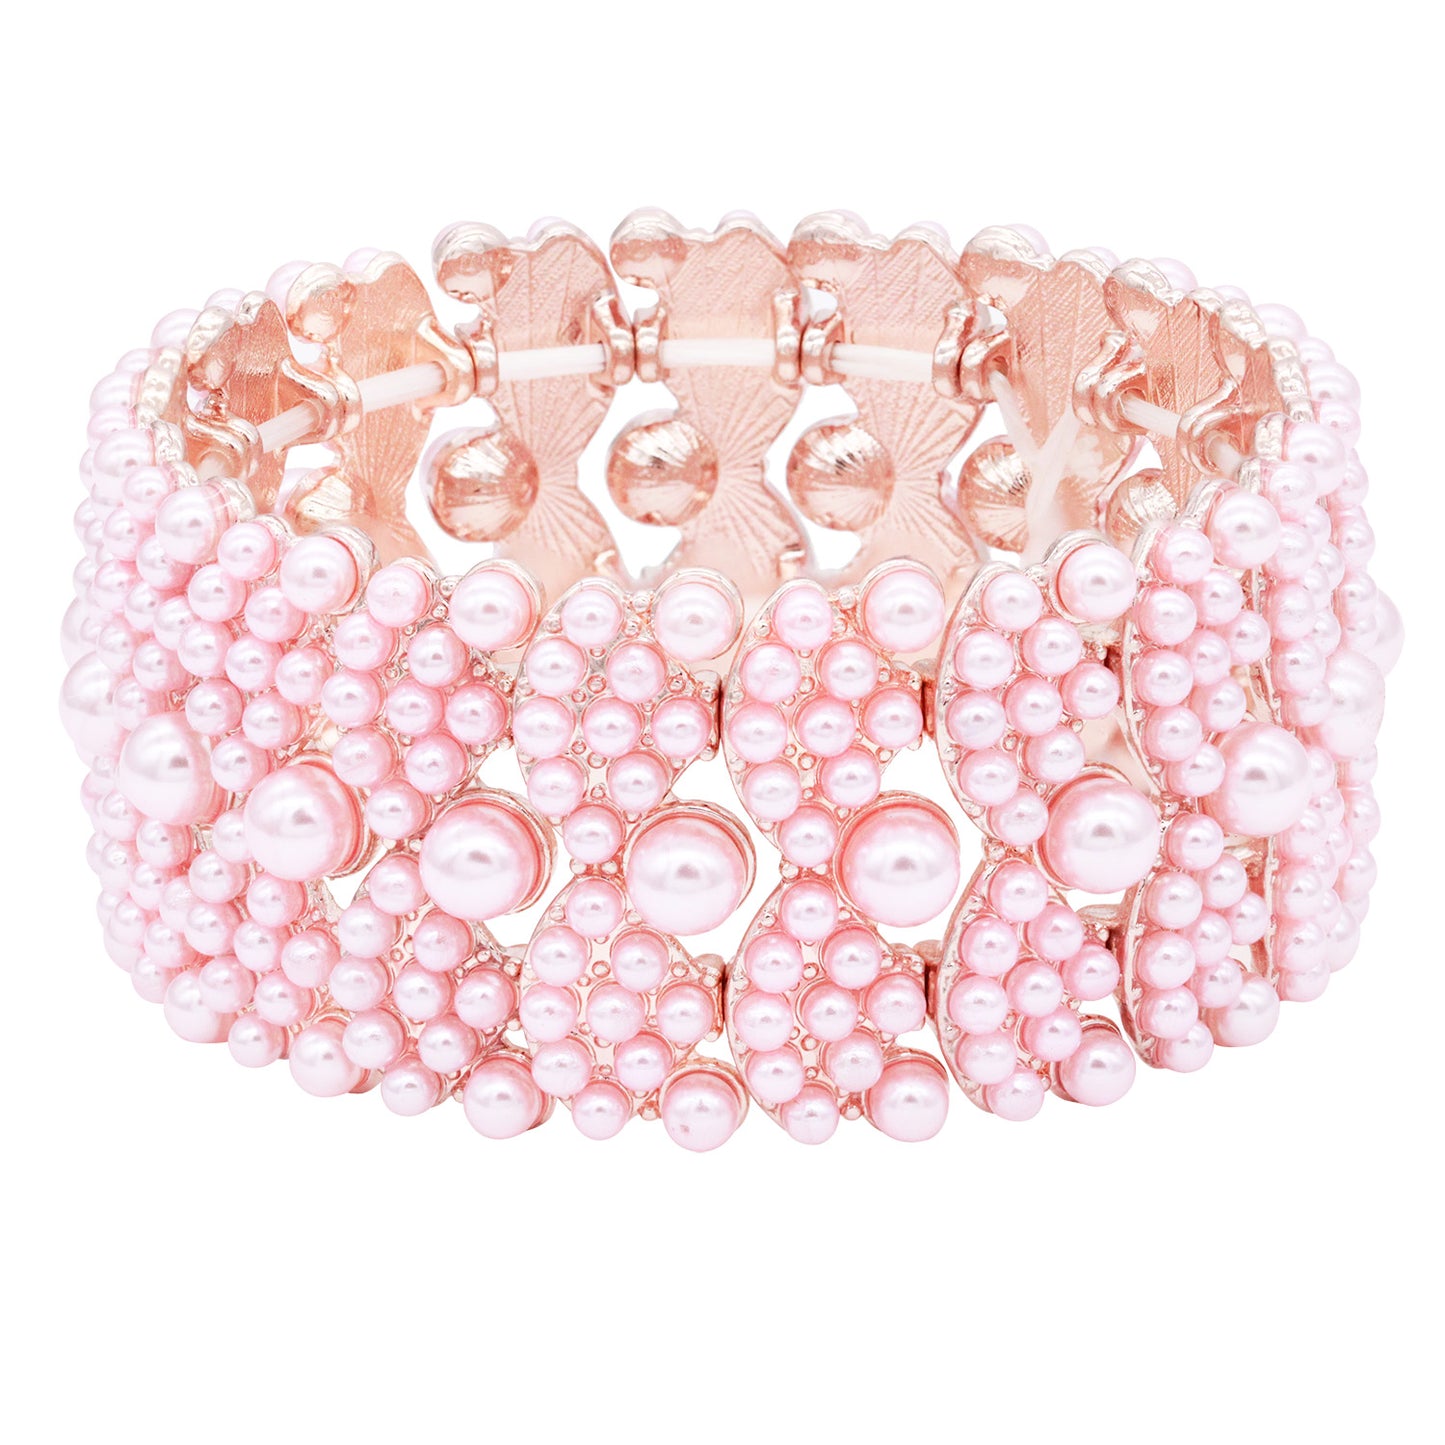 Lavencious Simulated Pearl Waves Design Elastic Stretch Bracelet Party Jewelry for Women - Pink